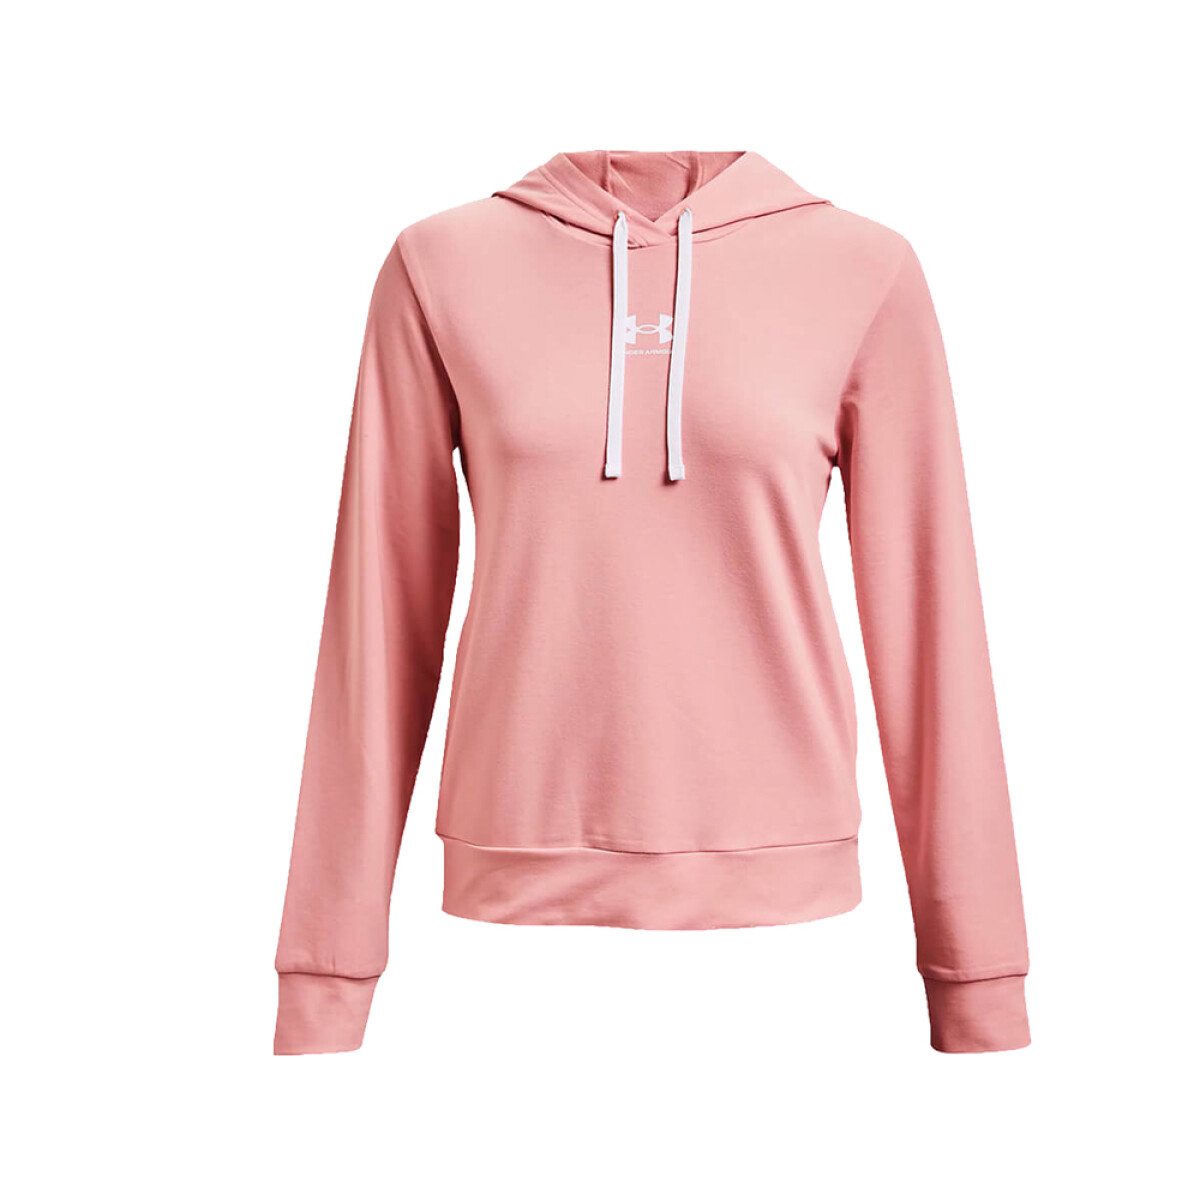 BUZO UNDER ARMOUR RIVAL TERRY - Pink 